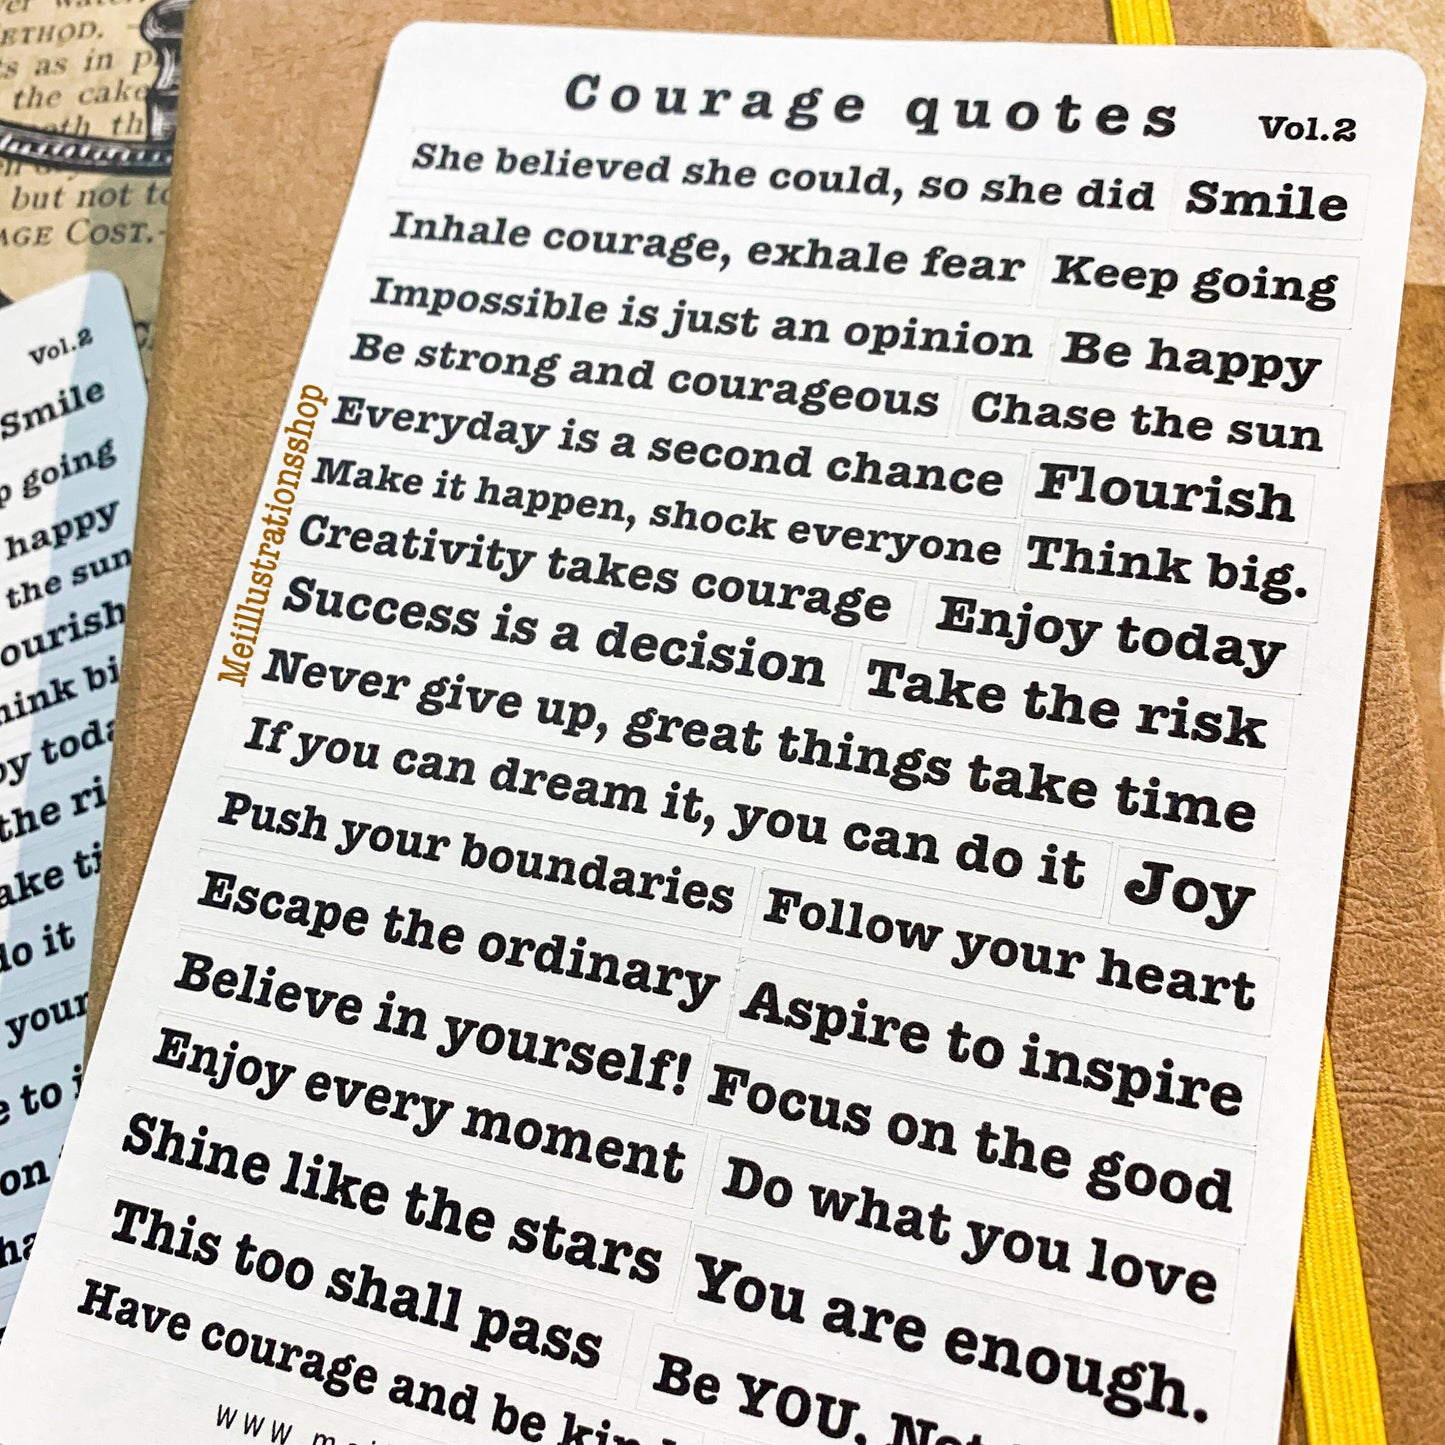 Courage quotes in bold type sticker sheet